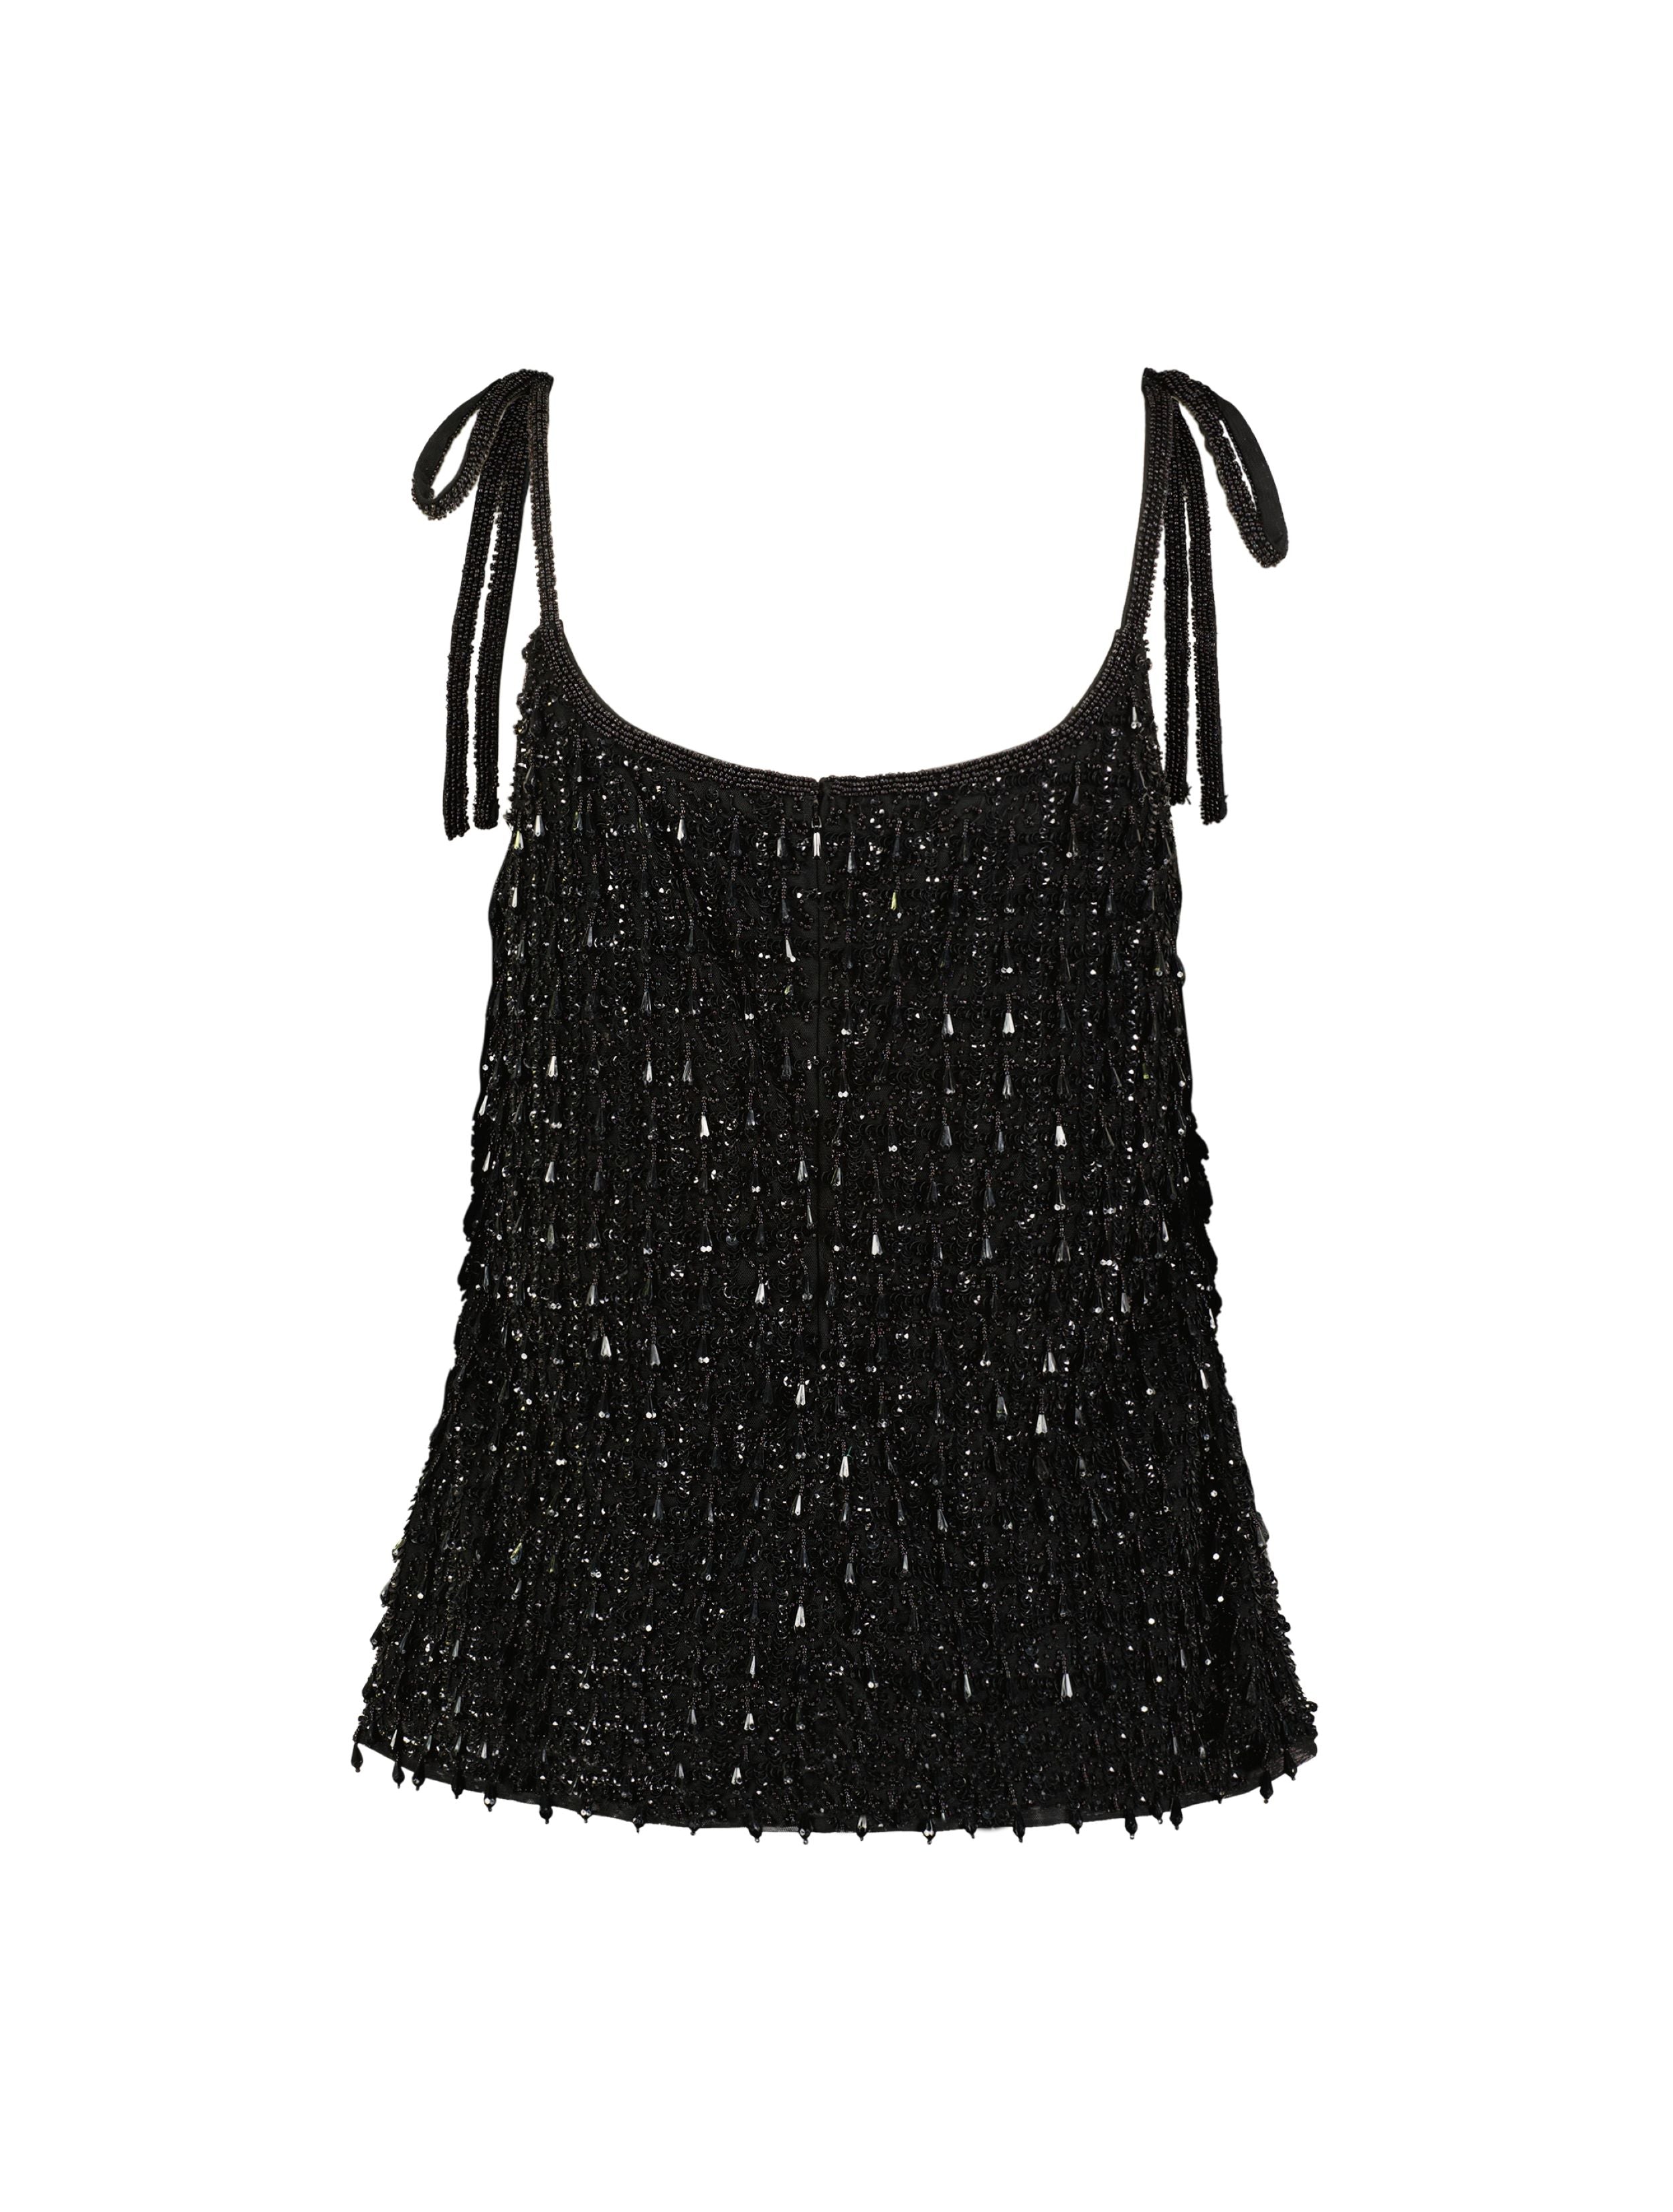 Rhinestone Bra Cami Party Top - Black – The Painted Cottage